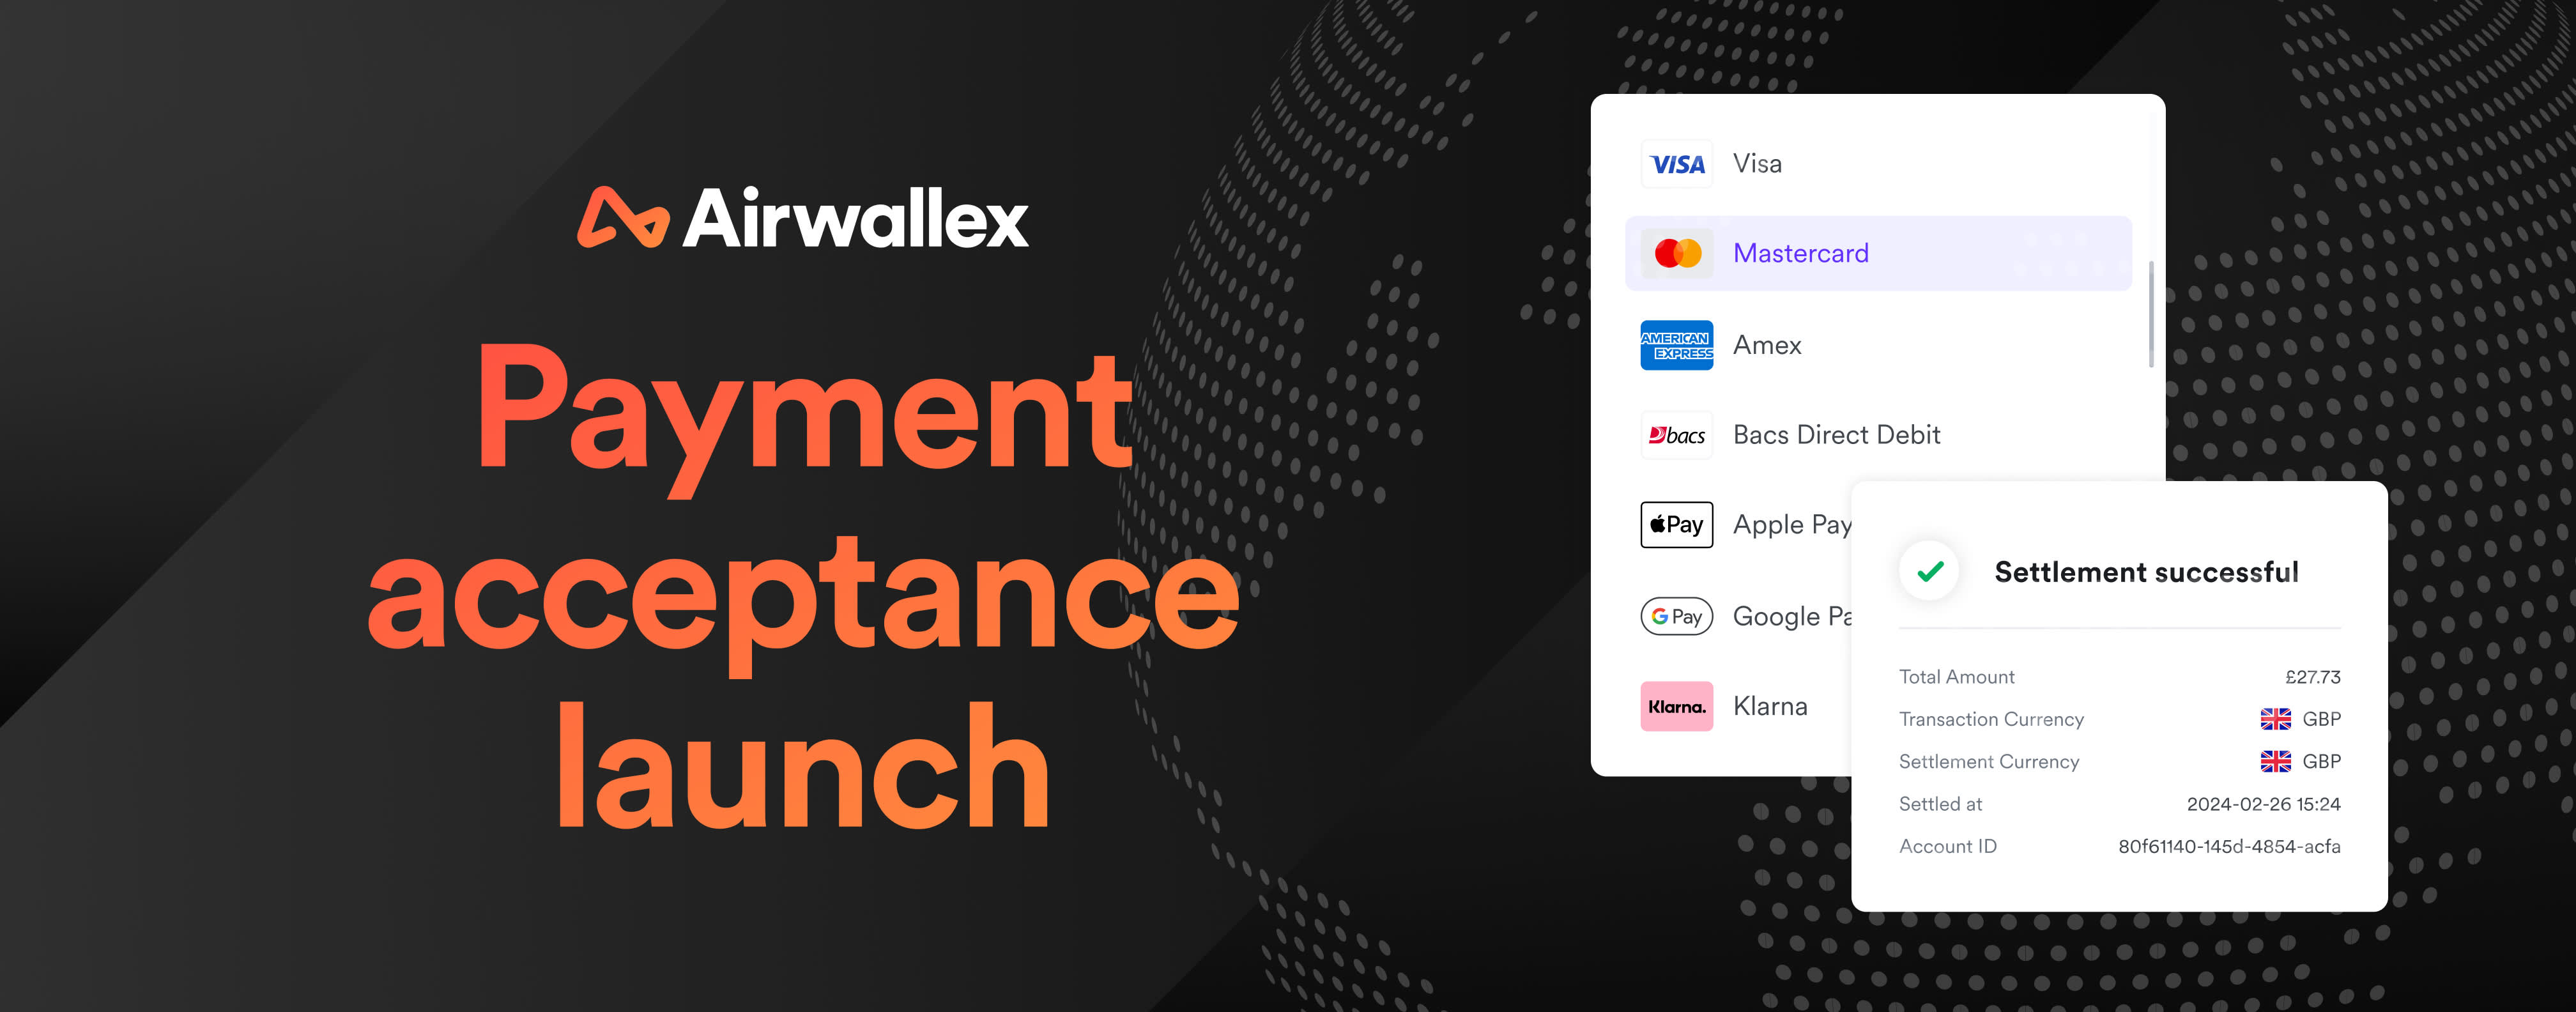 Airwallex expands payment acceptance to the U.S., cementing its position as a leading one-stop financial platform for borderless businesses